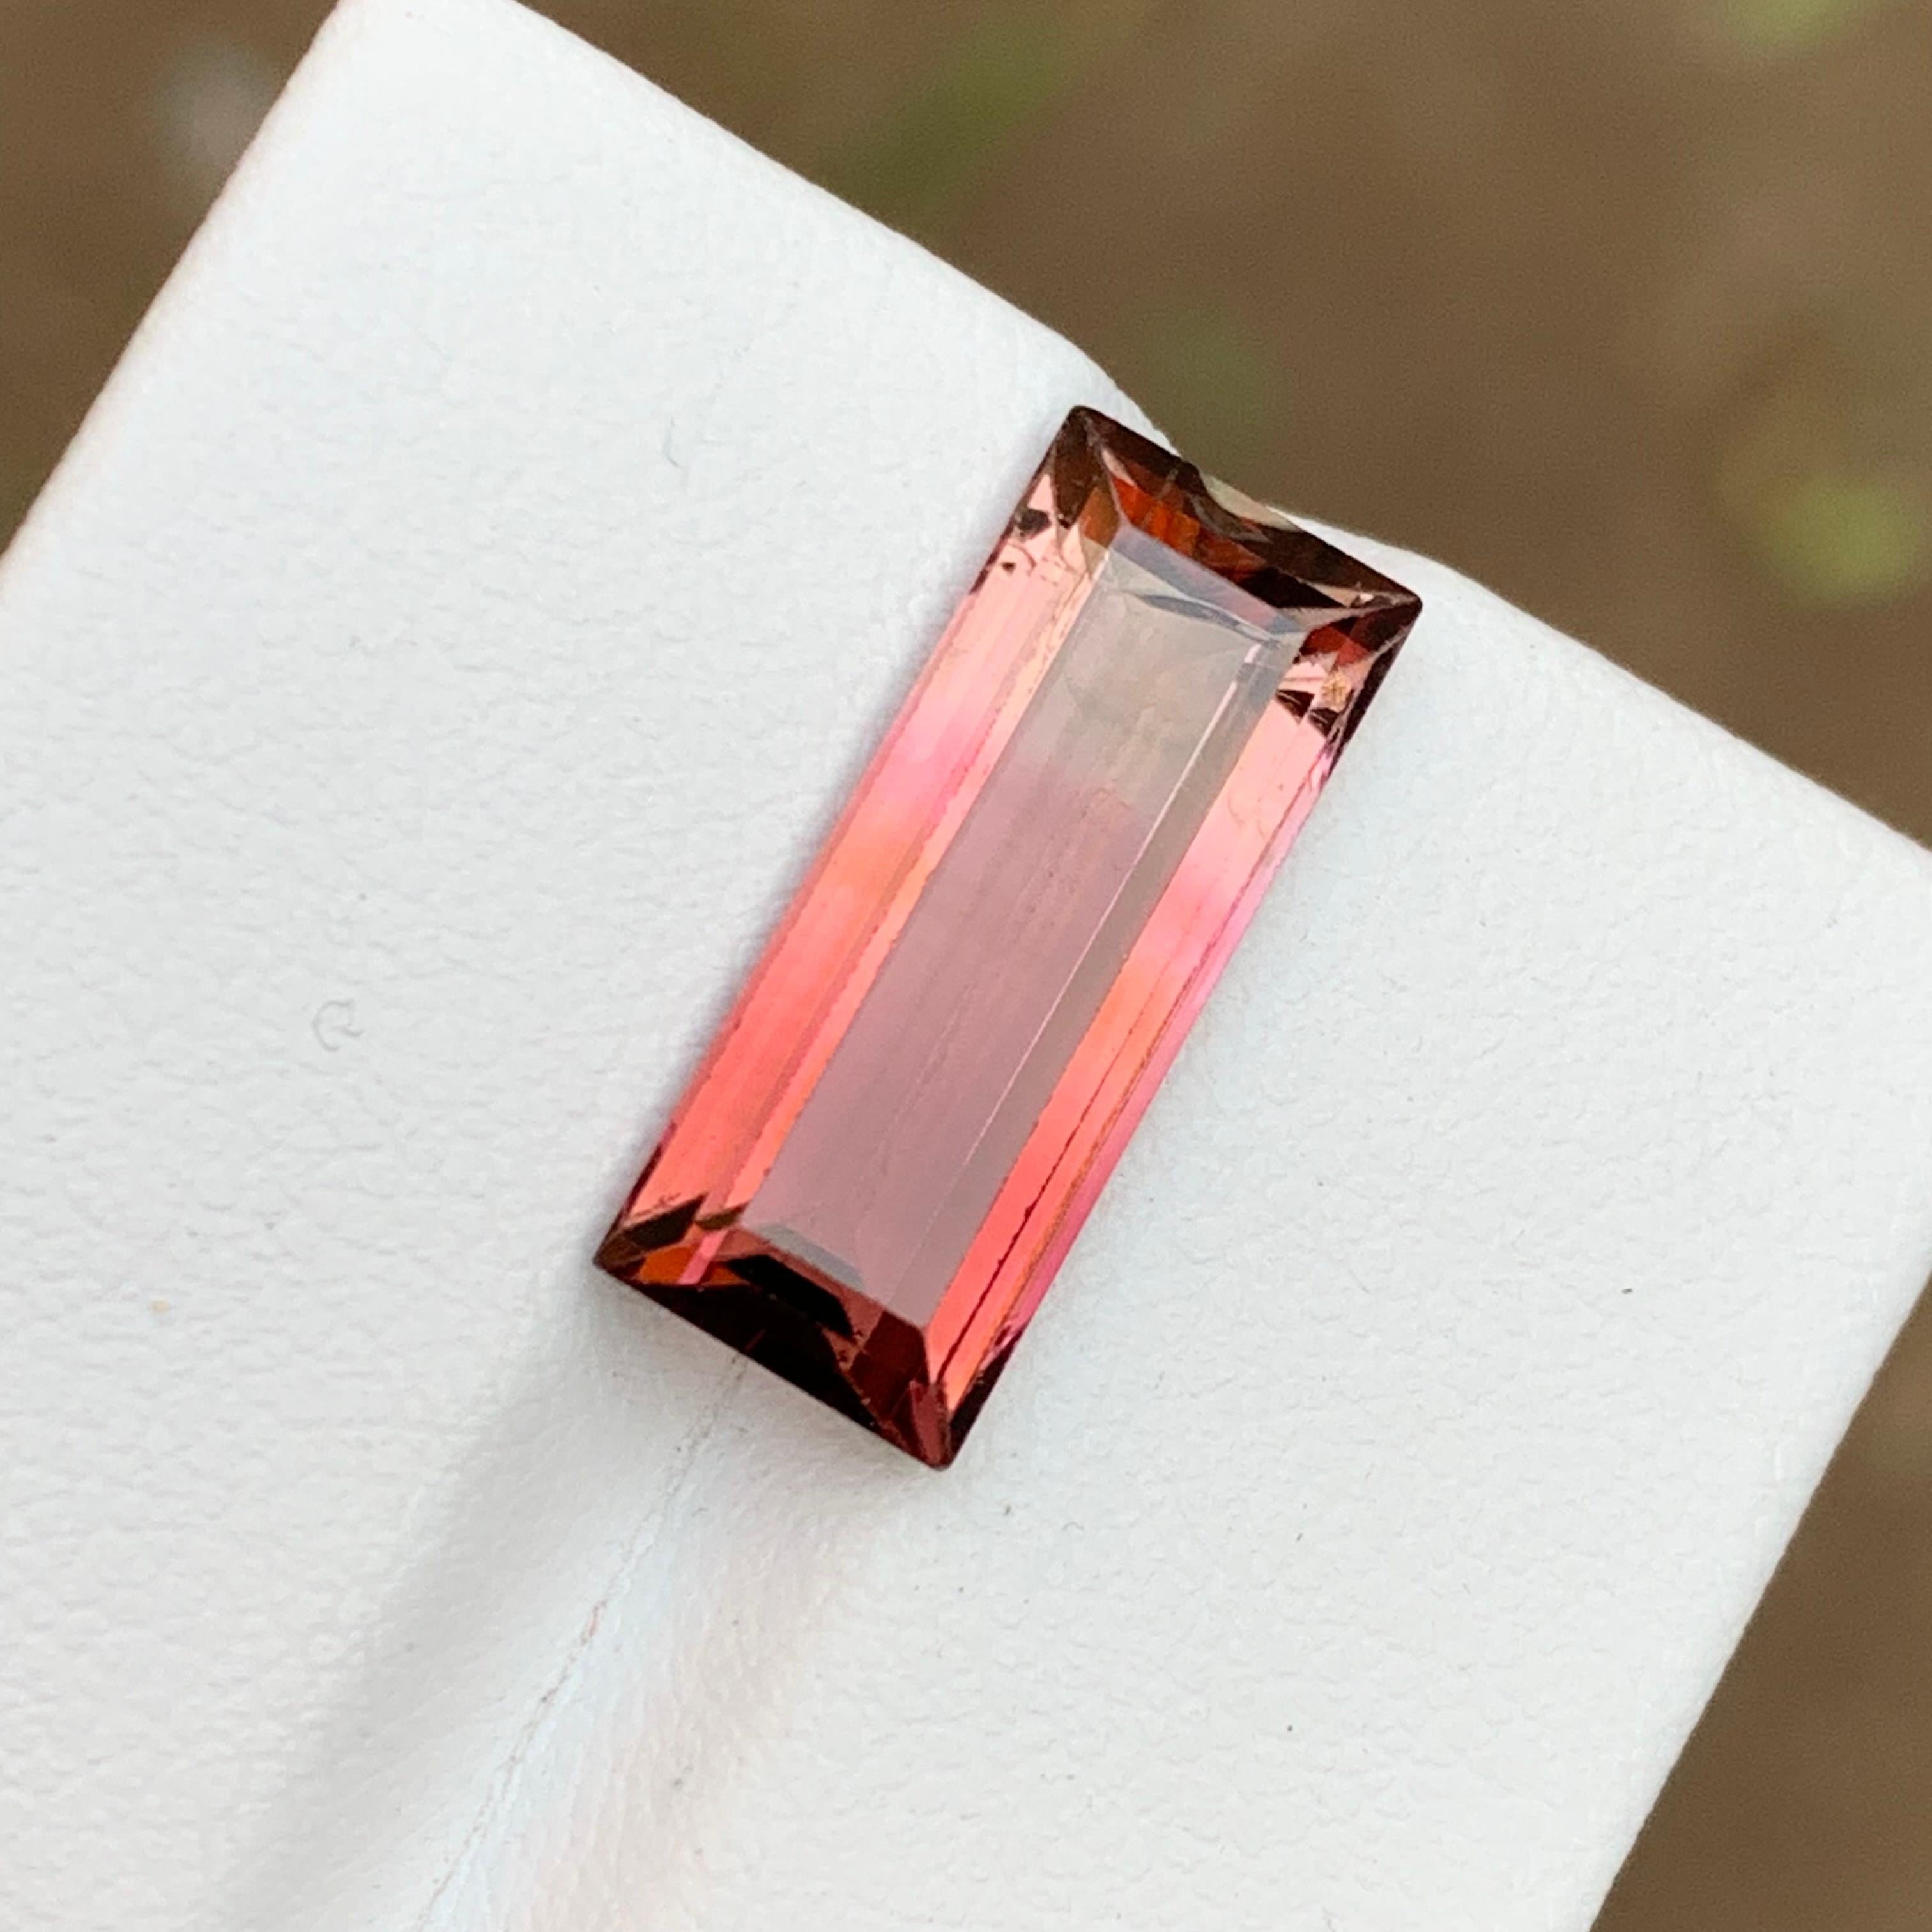 GEMSTONE TYPE: Tourmaline
PIECE(S): 1
WEIGHT: 6.40 Carats
SHAPE: Baguette 
SIZE (MM):  17.65 x 7.18 x 5.10 mm
COLOR: Pink Bicolor
CLARITY: 90% Eye Clean
TREATMENT: Heated
ORIGIN: Afghanistan 🇦🇫 
CERTIFICATE: On demand

This stunning 6.40 carat